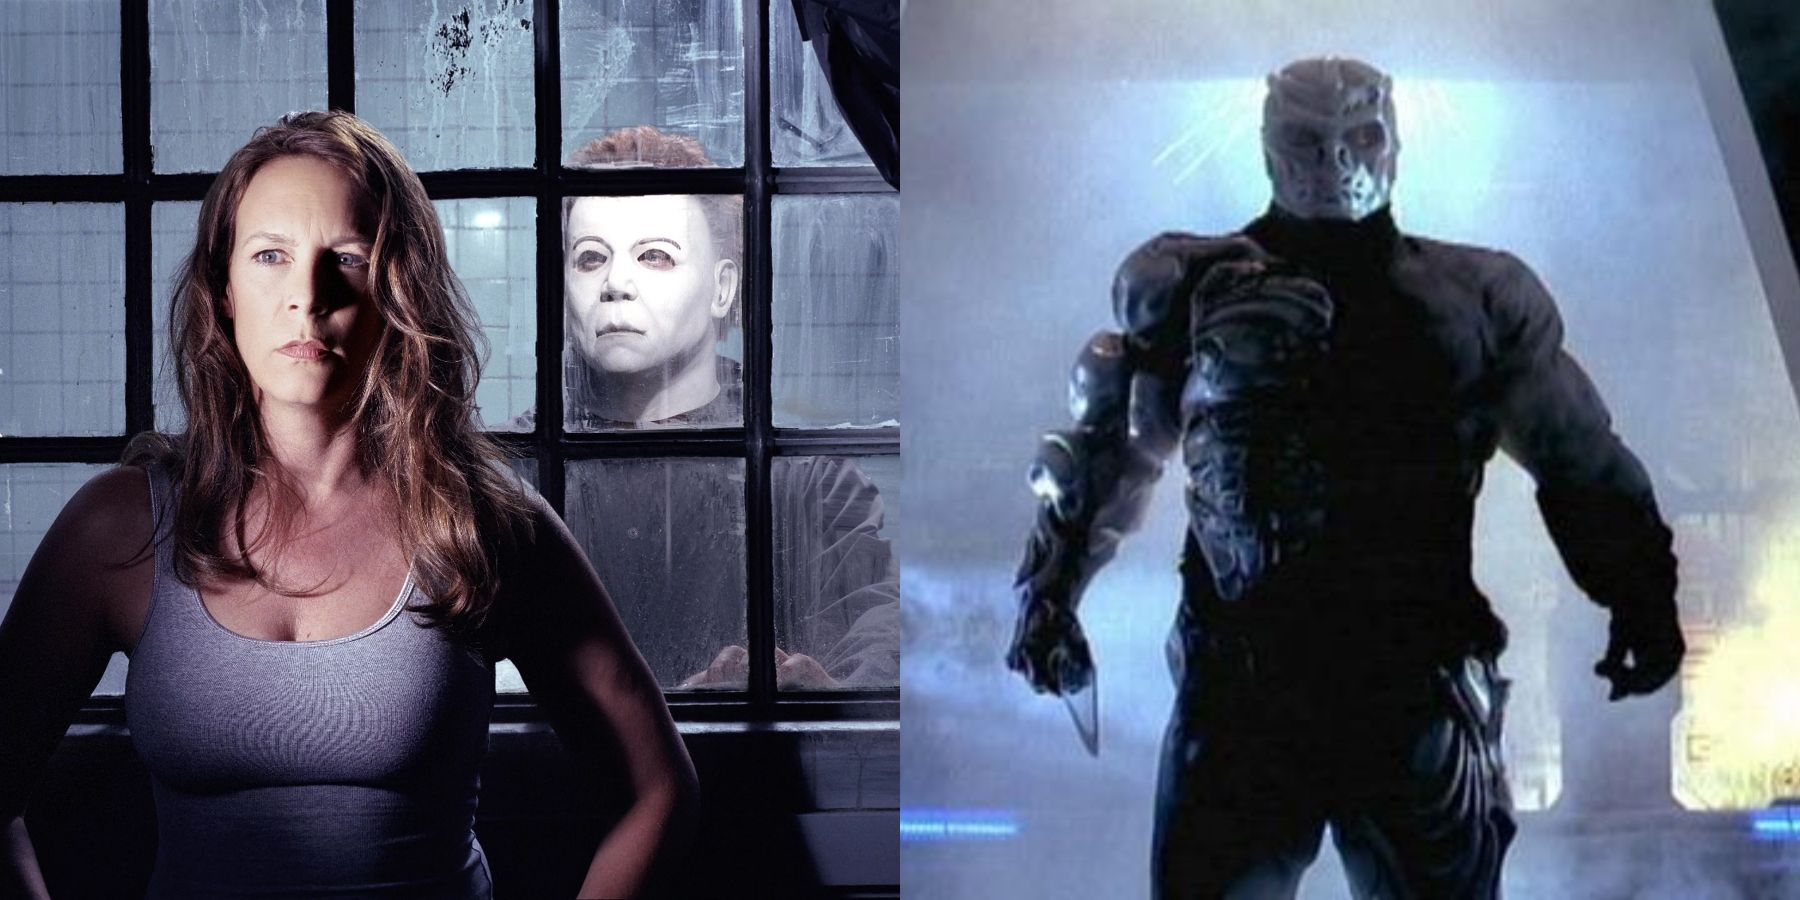 Split image of Laurie and Michael in Halloween: Resurrection and Jason Voorhees in Jason X